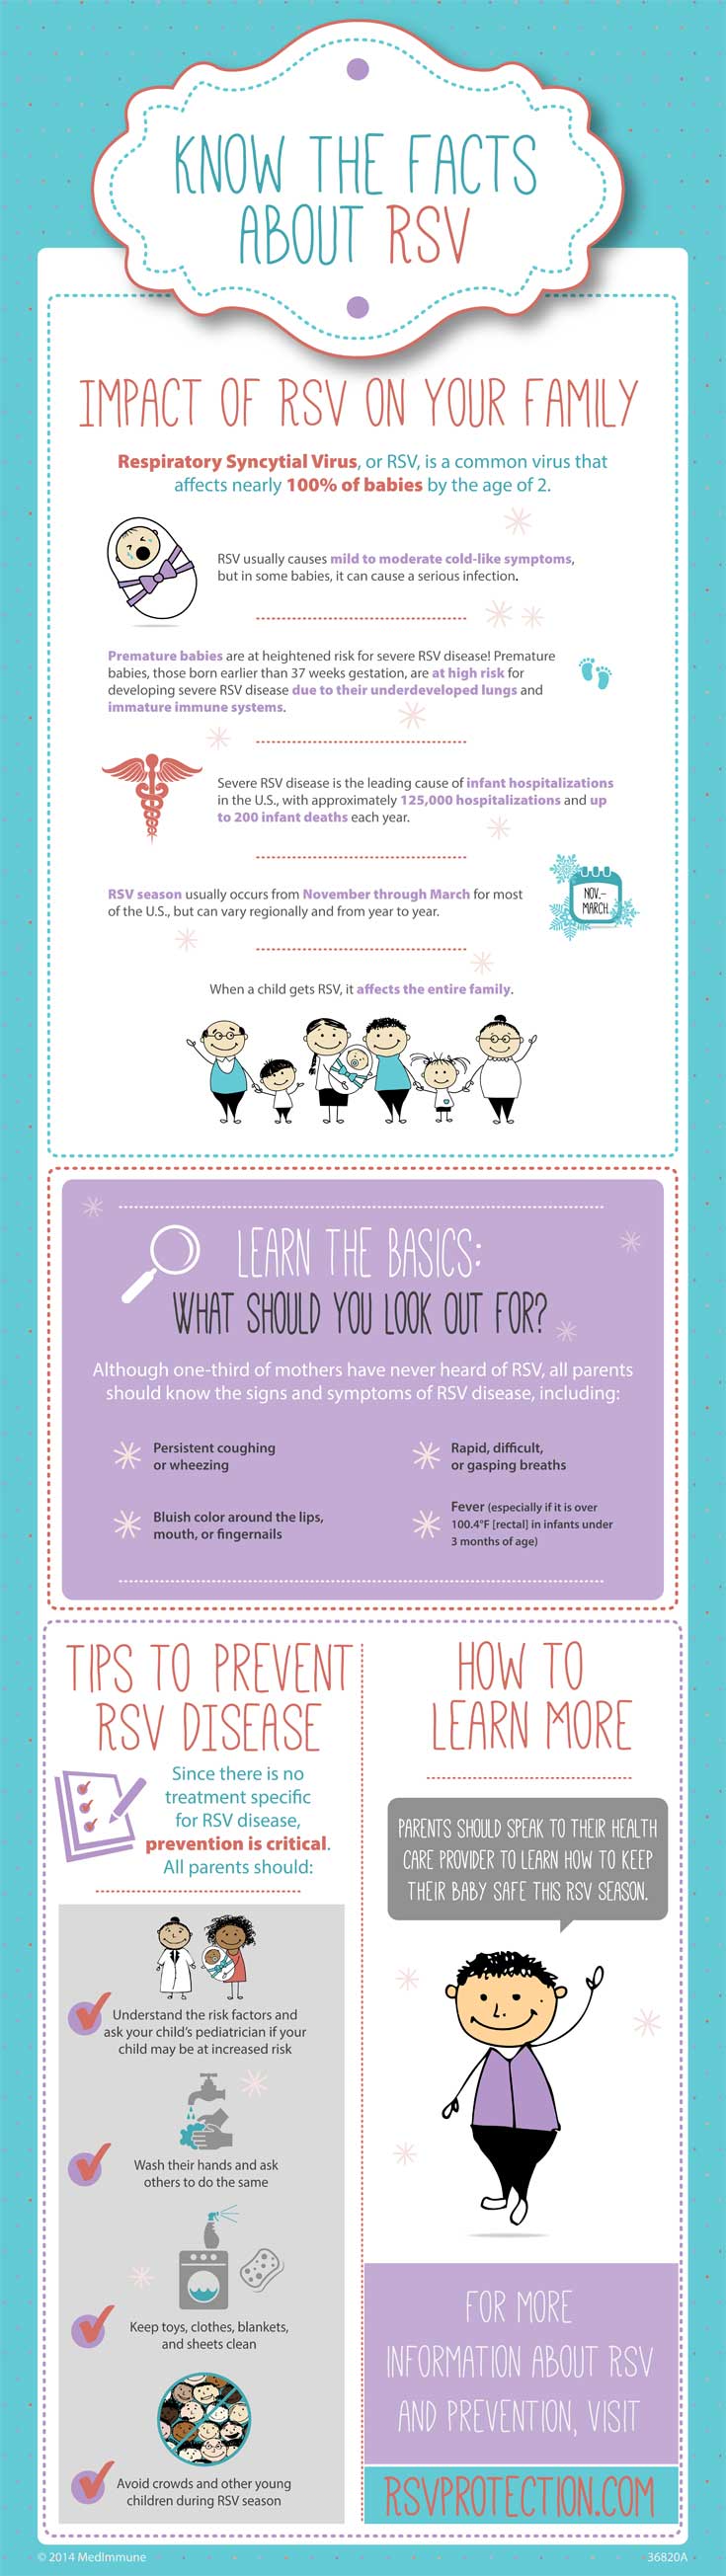 RSV infographic - important info for moms with babies under age 2 especially preemies